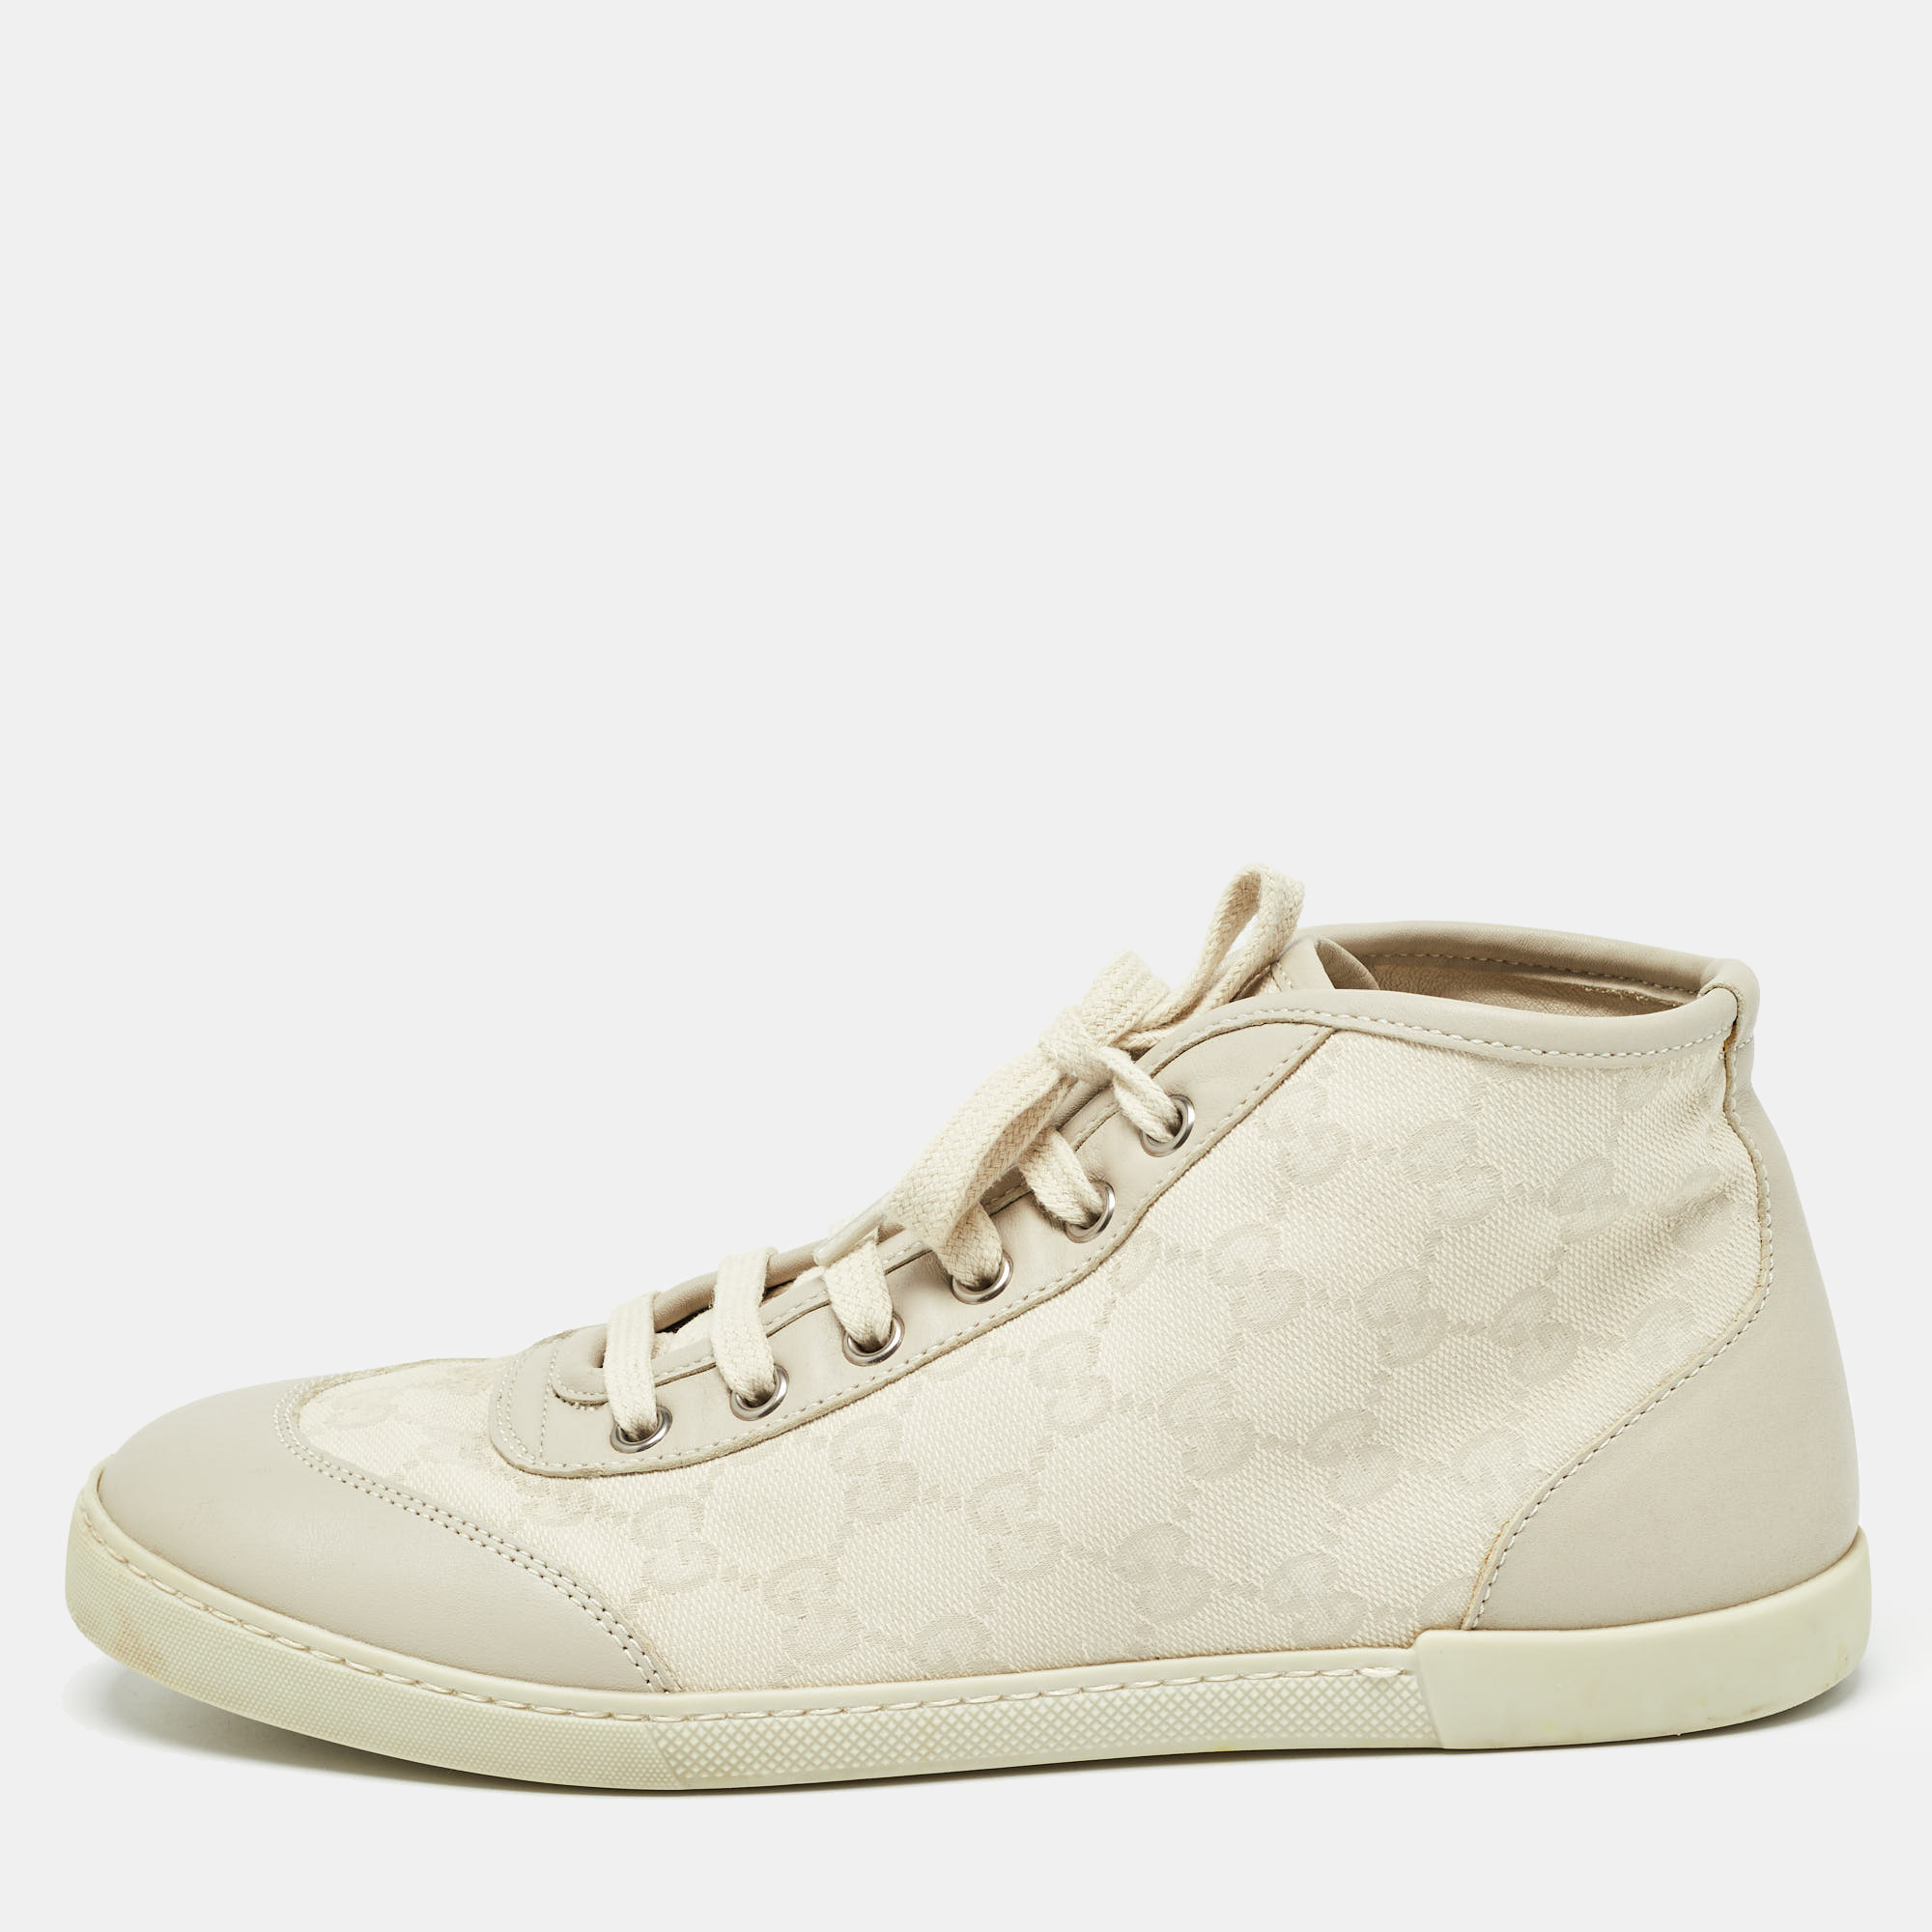 Gucci two tone gg canvas and leather high top sneakers size 38